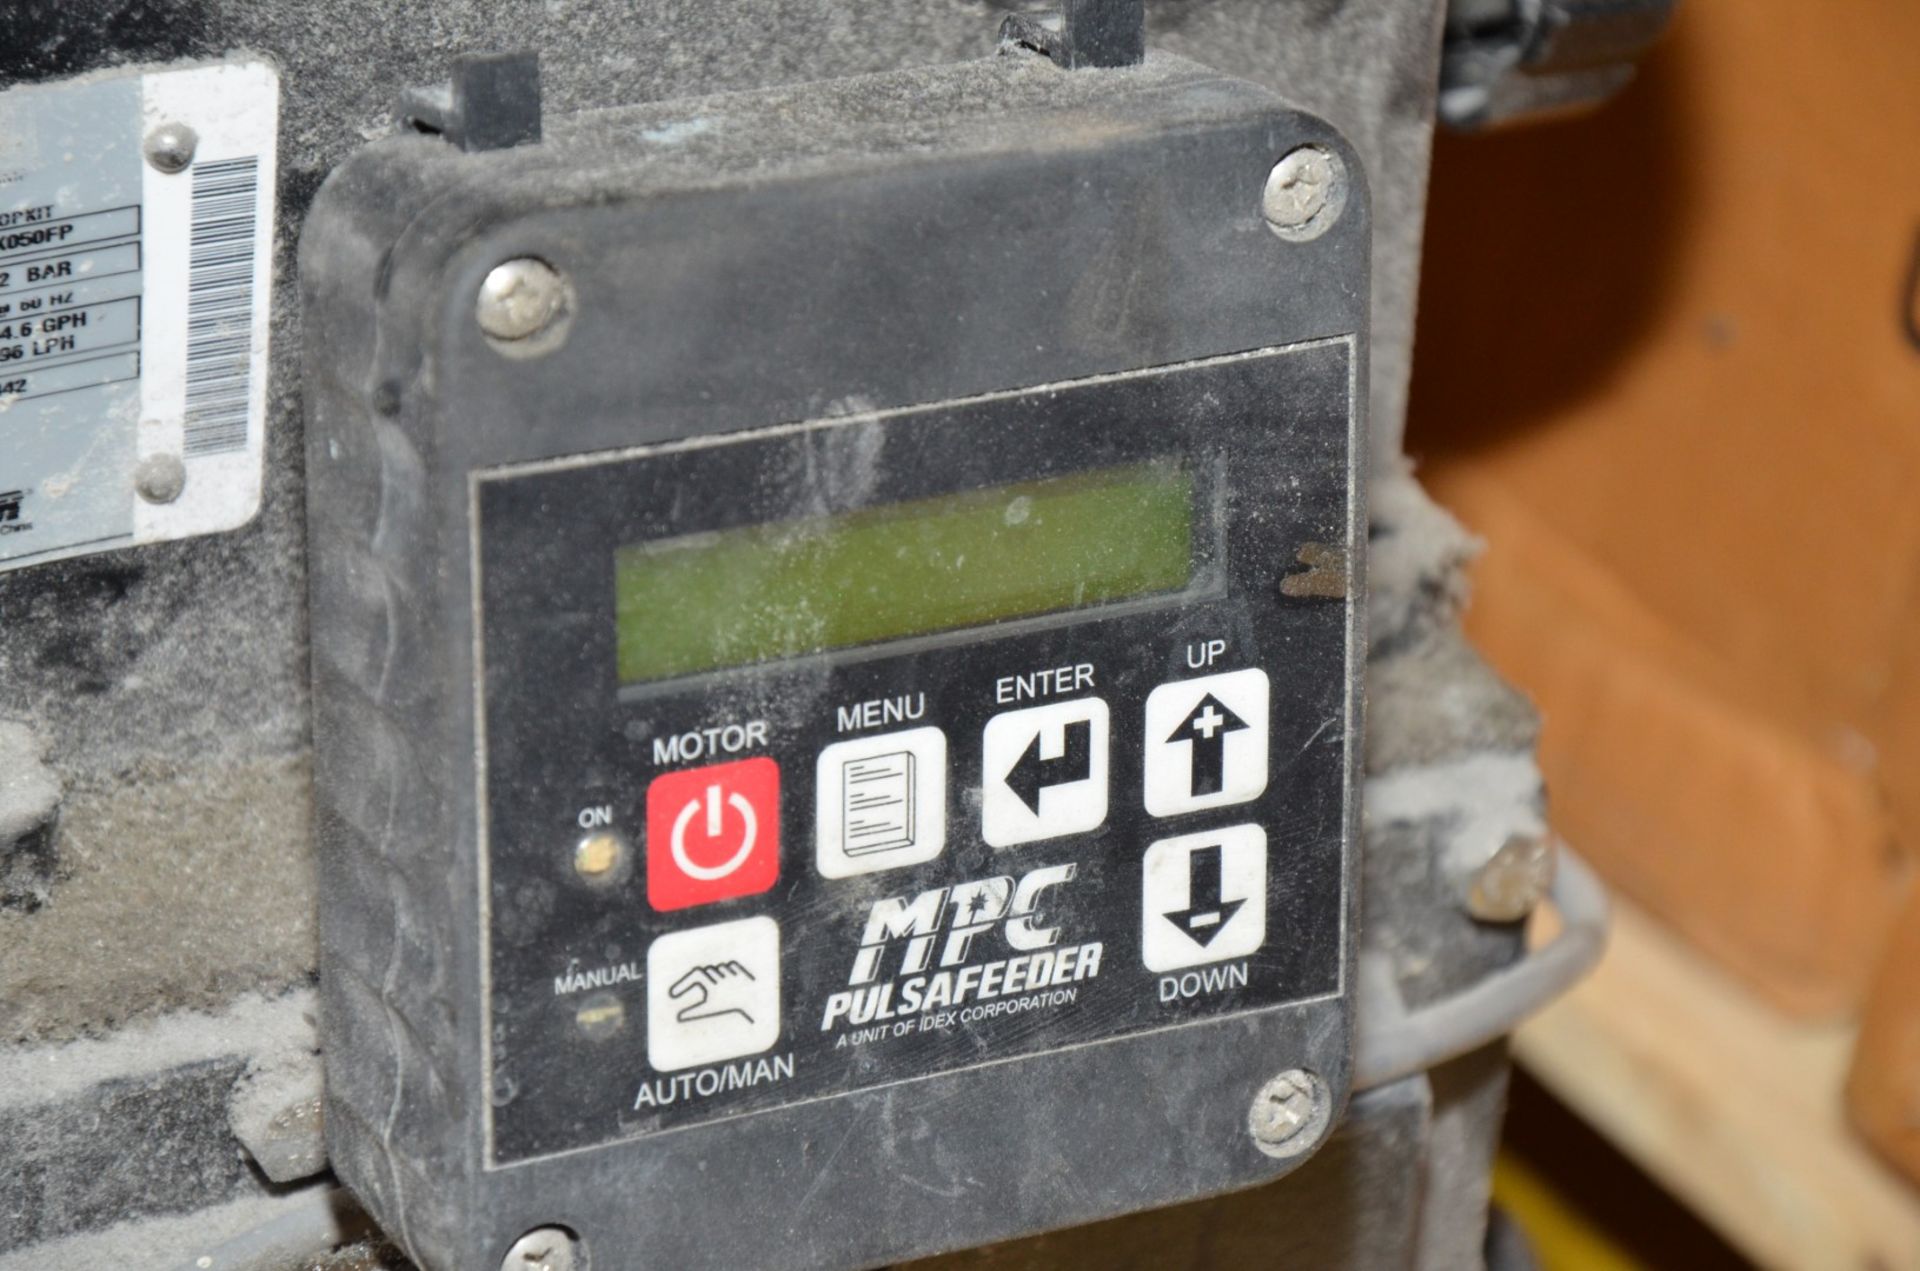 MNI DC5C5FP-M1XE VARIABLE SPEED DIGITAL METERING PUMP WITH DIGITAL MPC PULSAFEEDER CONTROL, 90 - Image 4 of 4